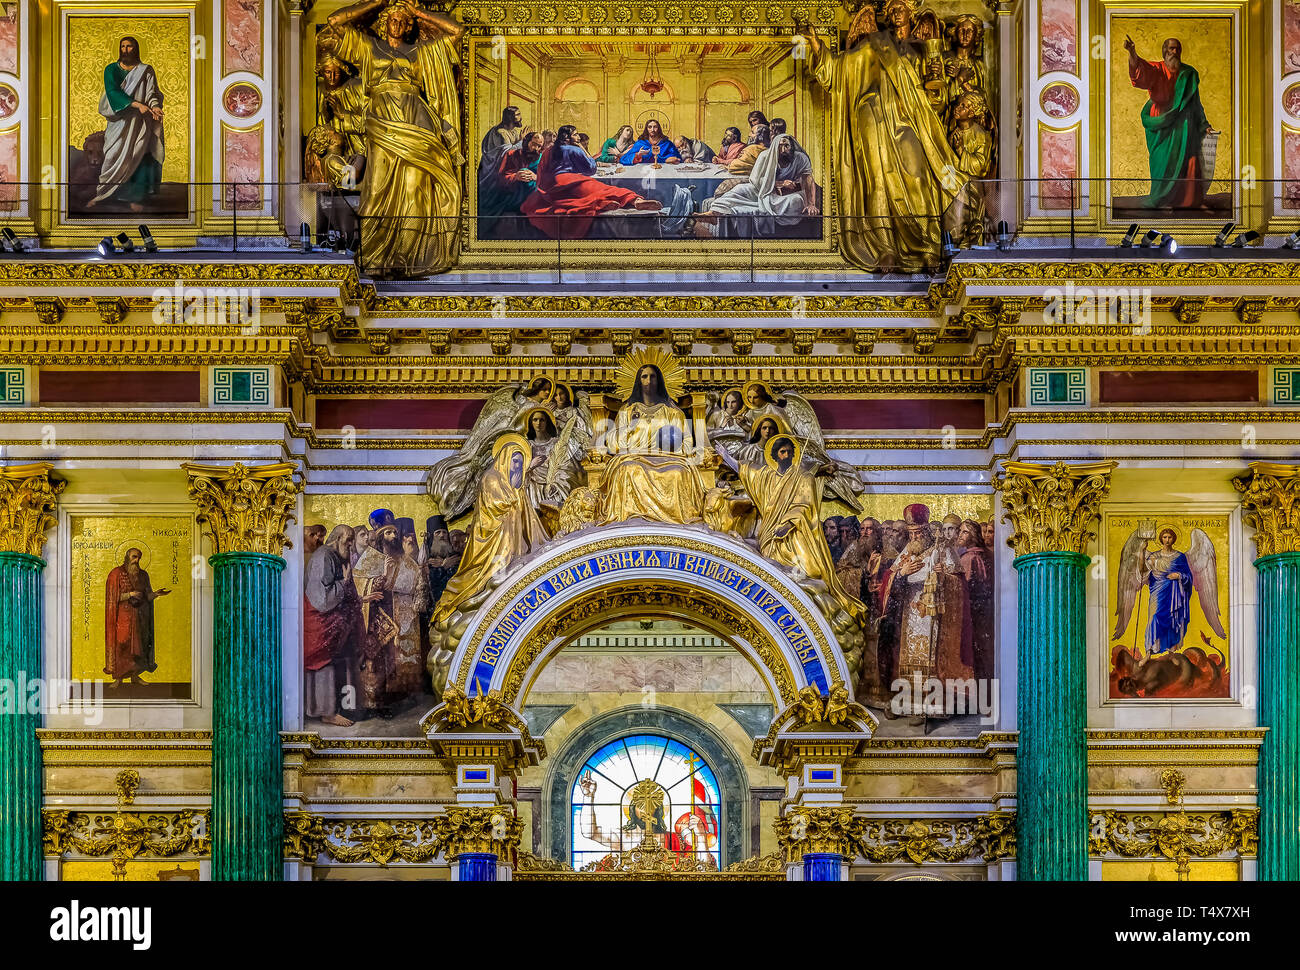 Saint Petersburg, Russia - September 10, 2017: Ornate interior, malachite columns, golden relief and colorful icons depicting Jesus Christ and saints  Stock Photo